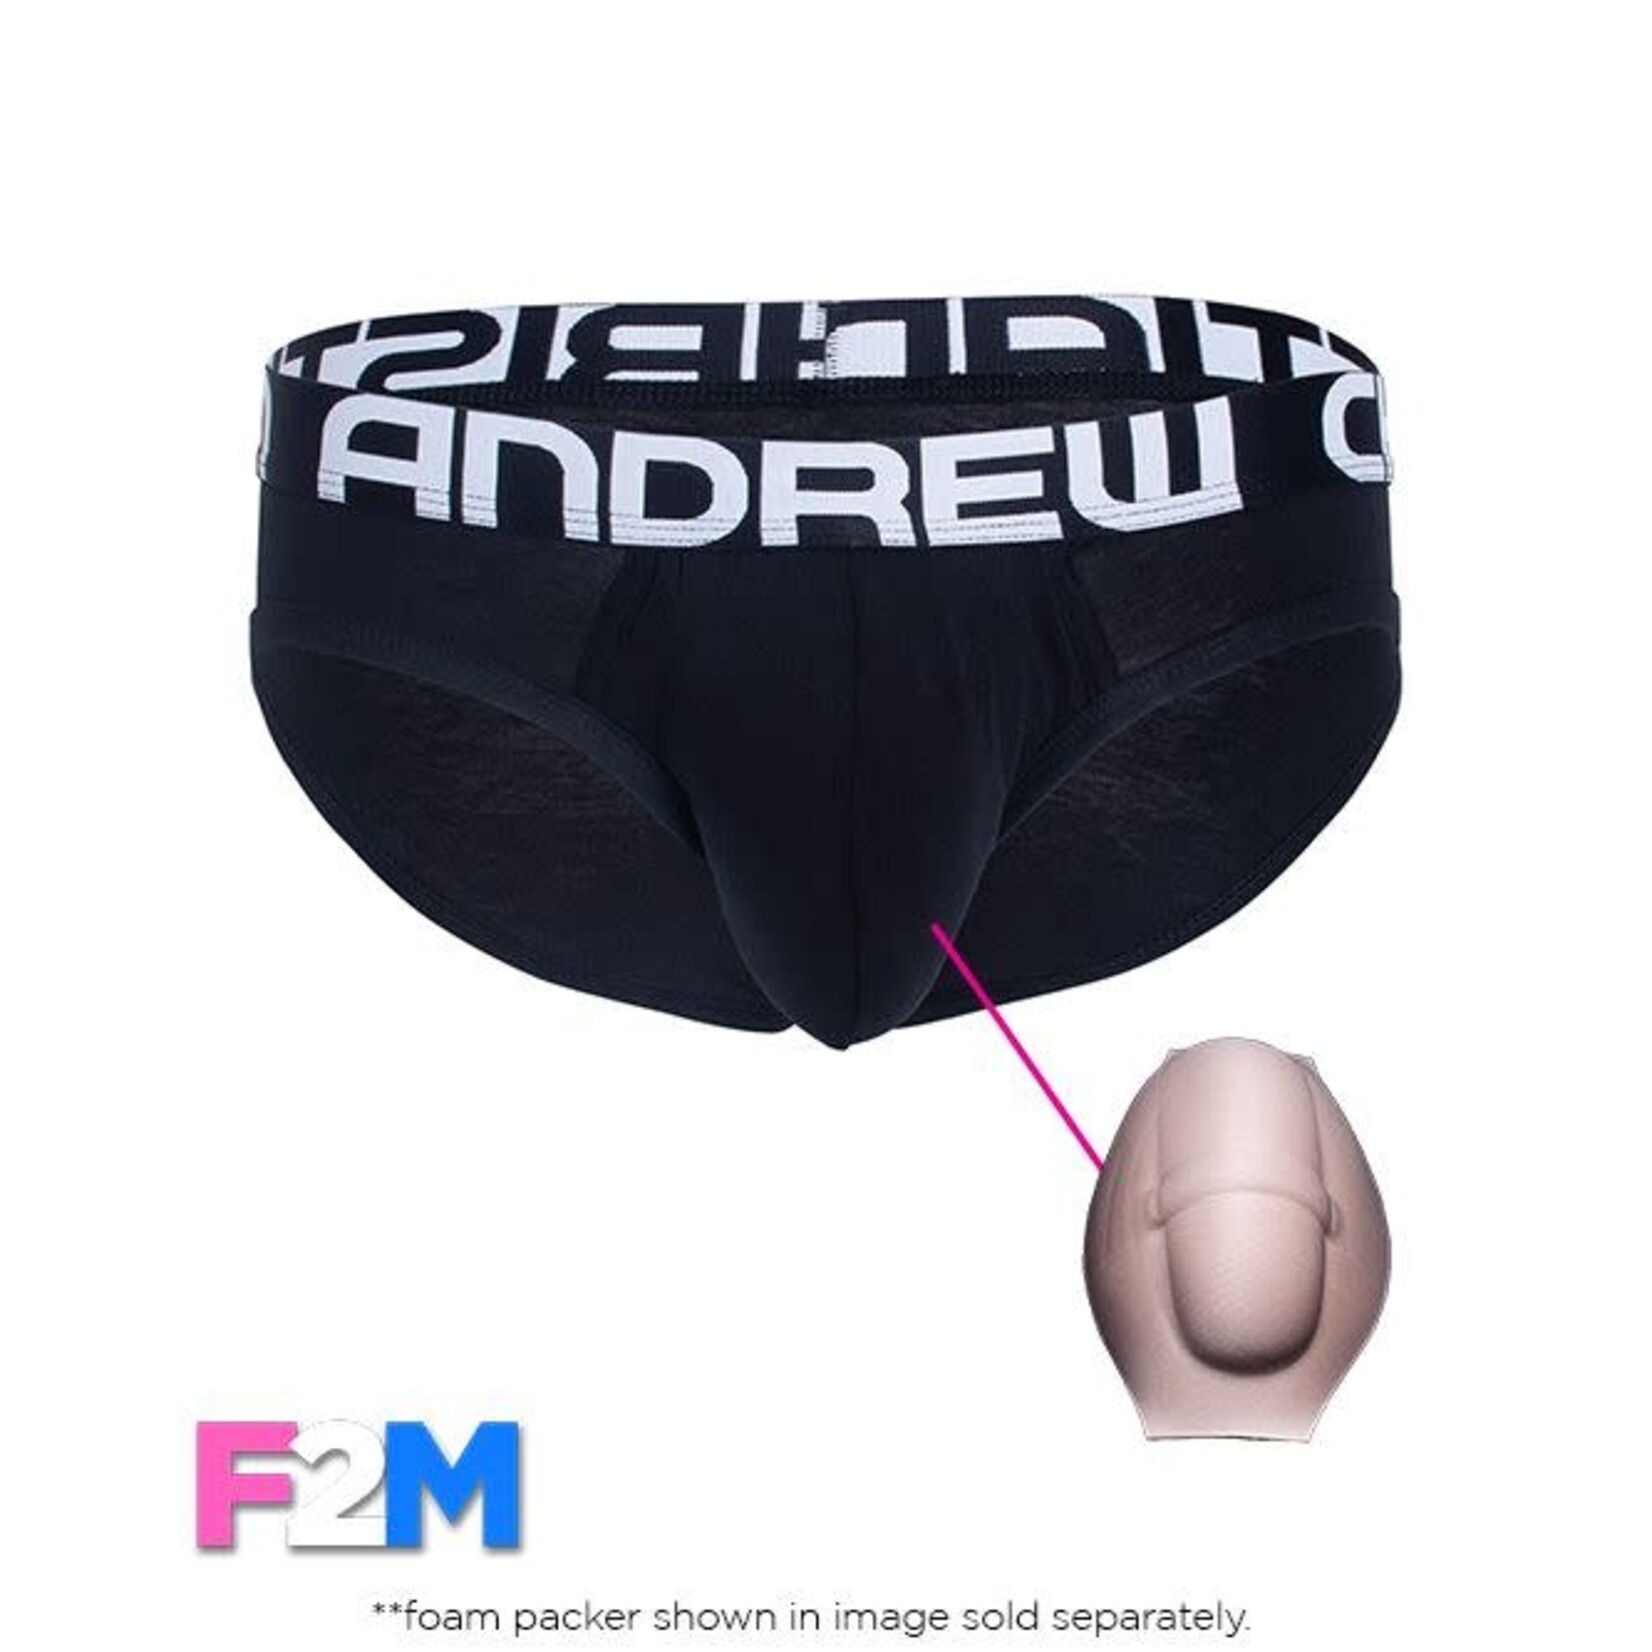 ANDREW CHRISTIAN ANDREW CHRISTIAN - F2M TRANS MASC BRIEF X-SMALL